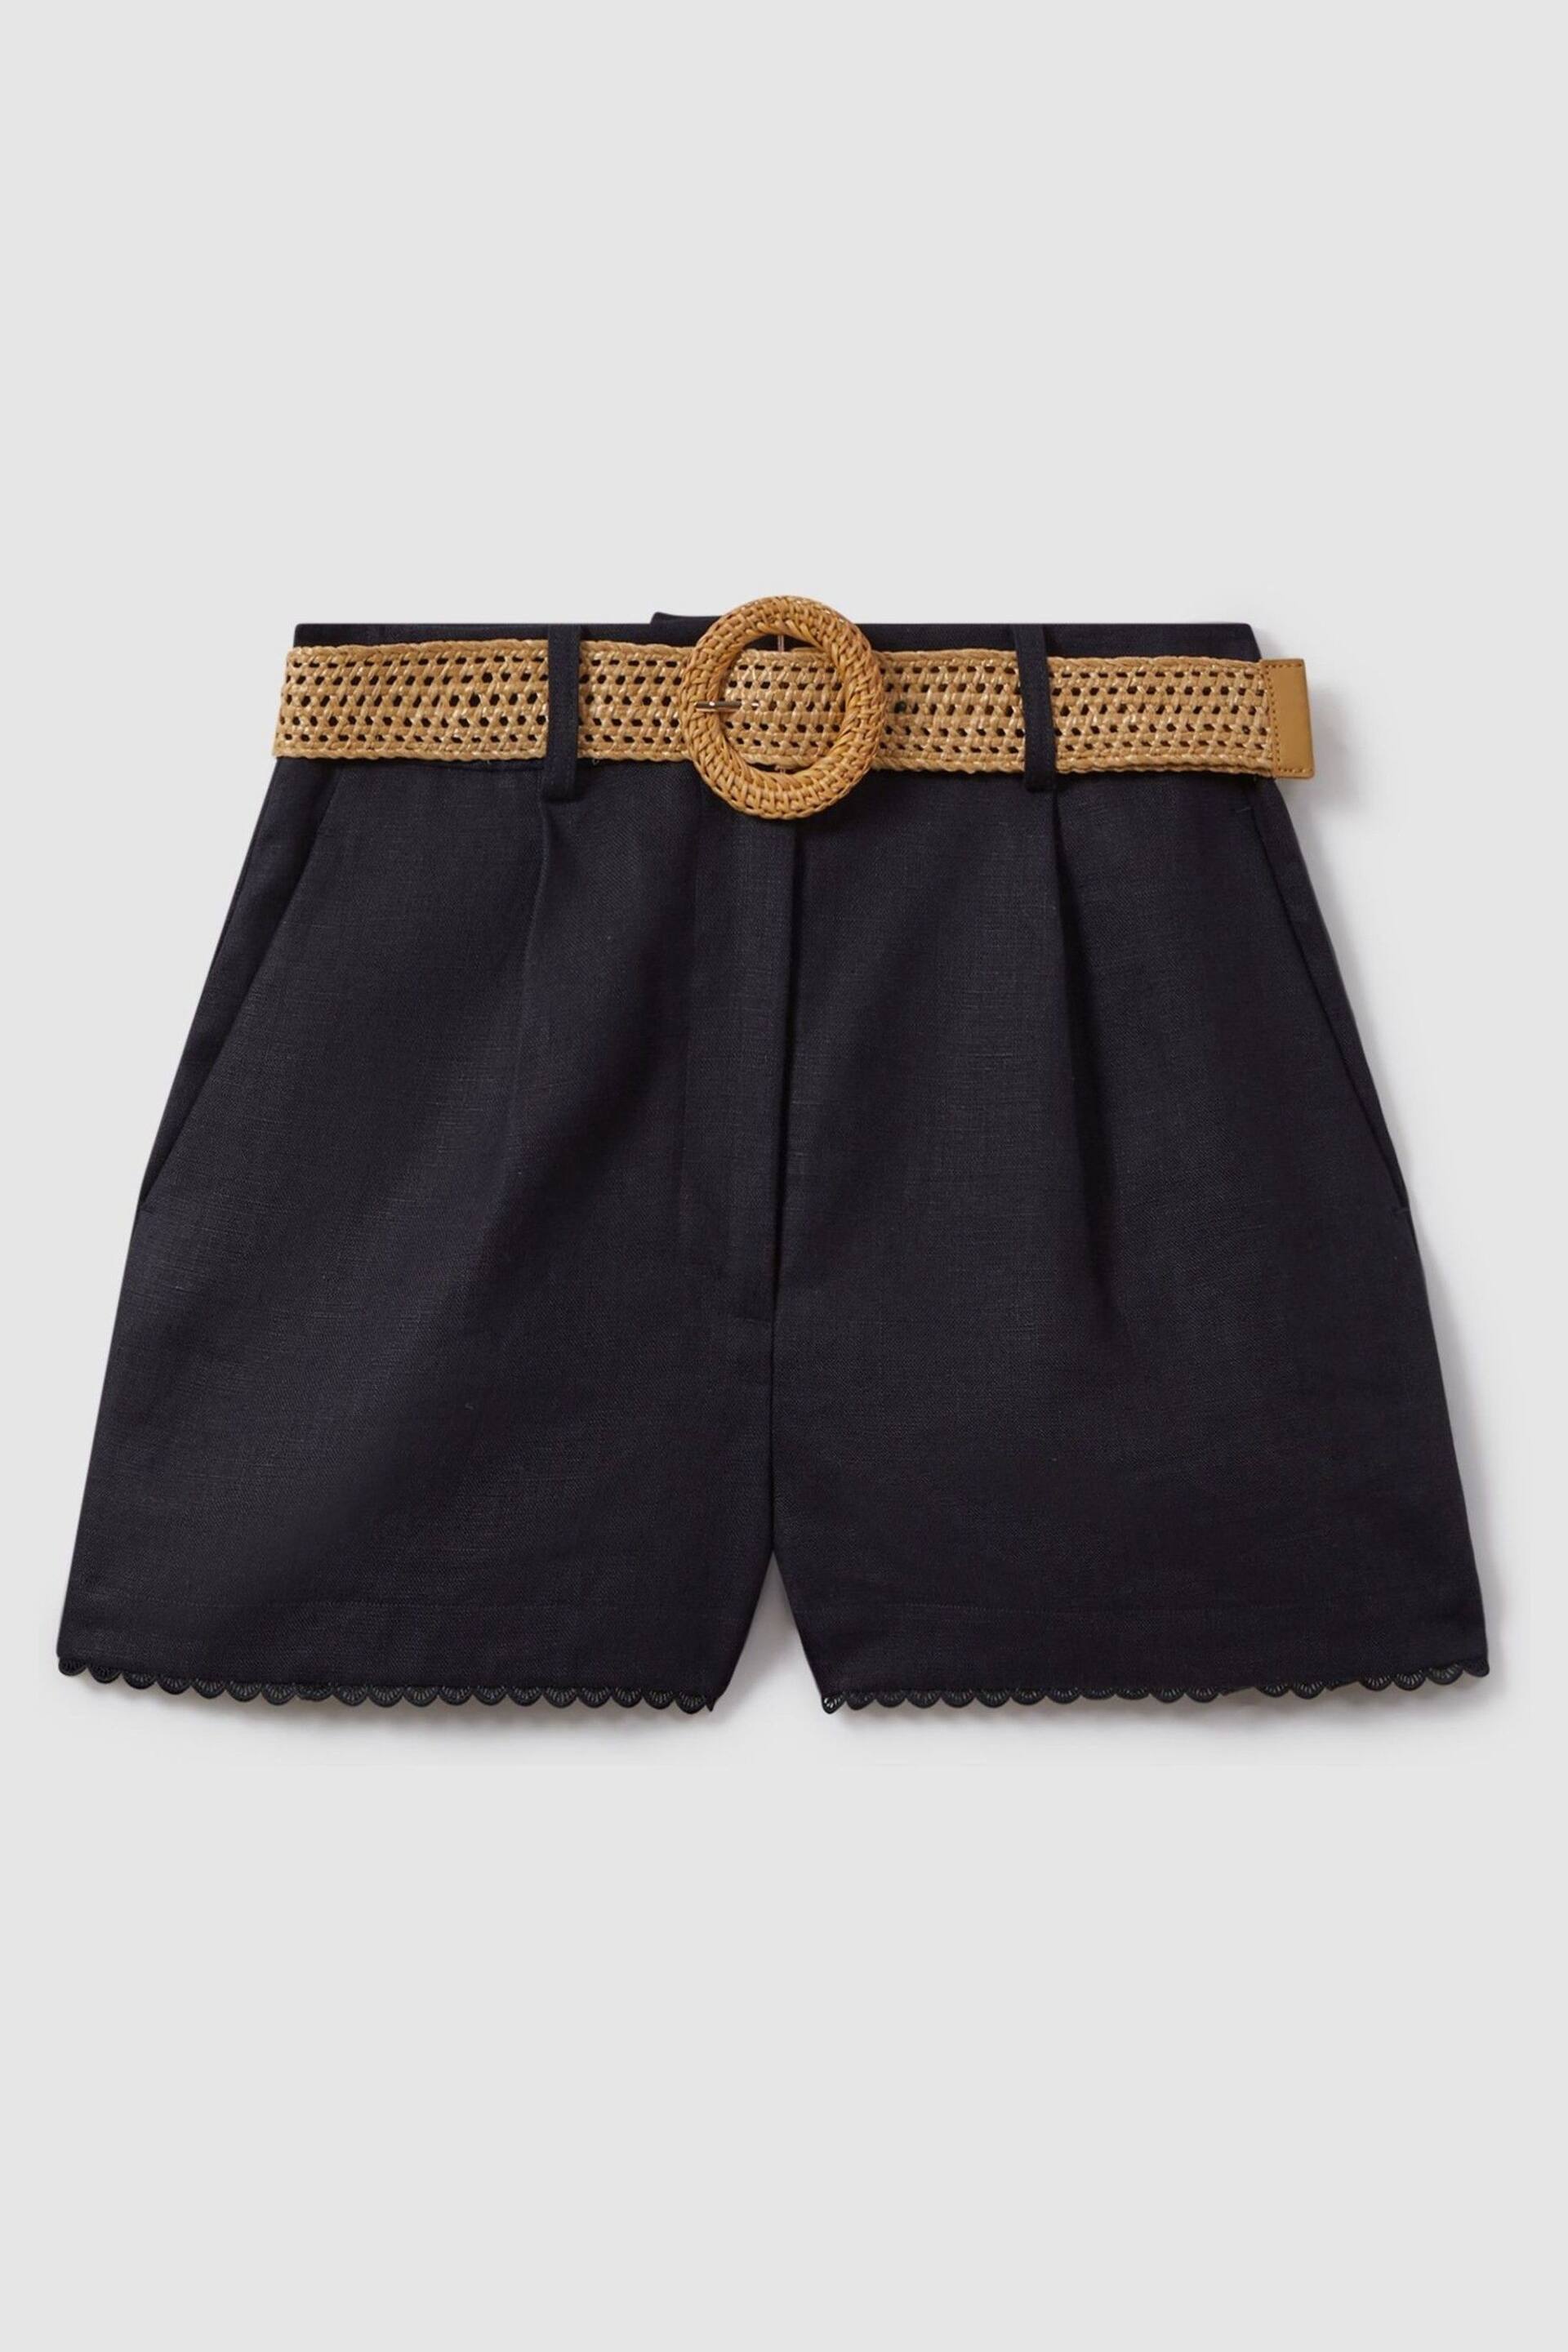 Reiss Navy Belle Linen Belted Shorts - Image 2 of 6